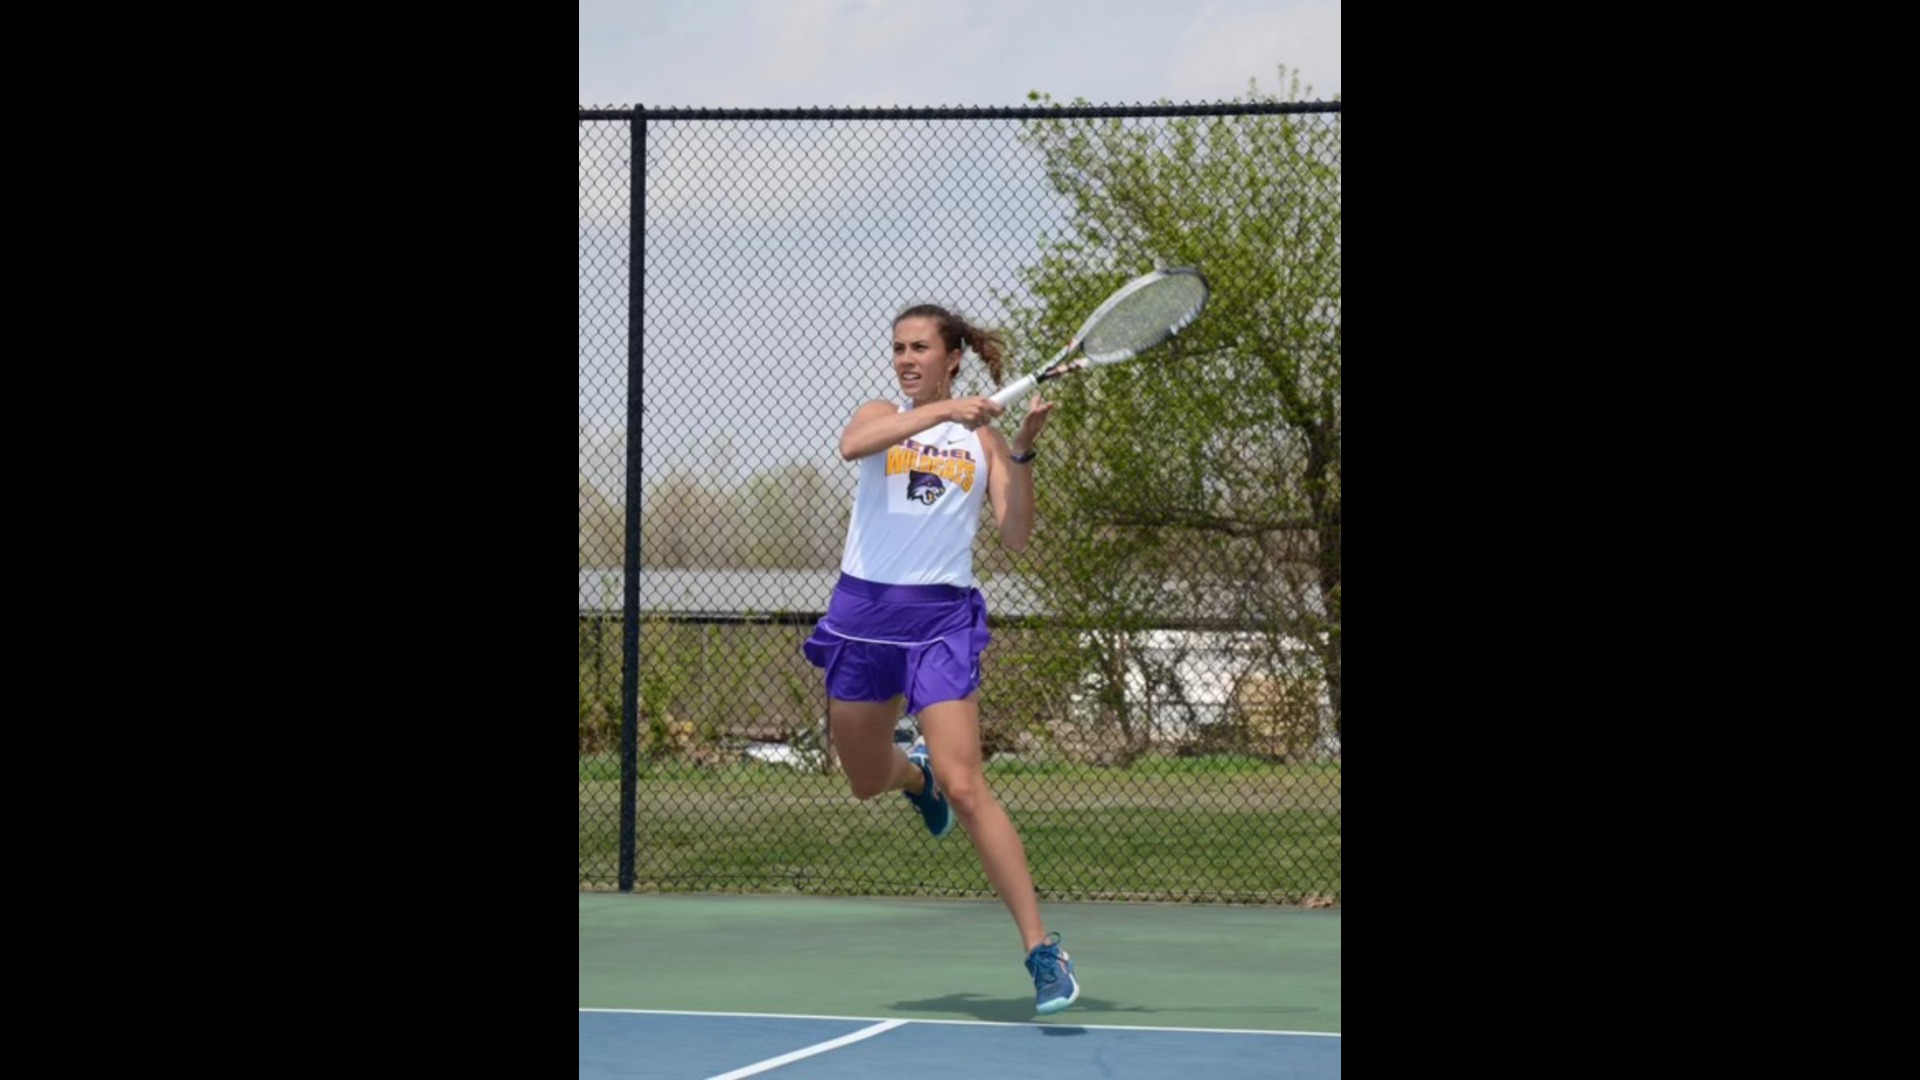 Lady Wildcats Receive Votes in NAIA Women’s Tennis Coaches’ Top 25 Rating